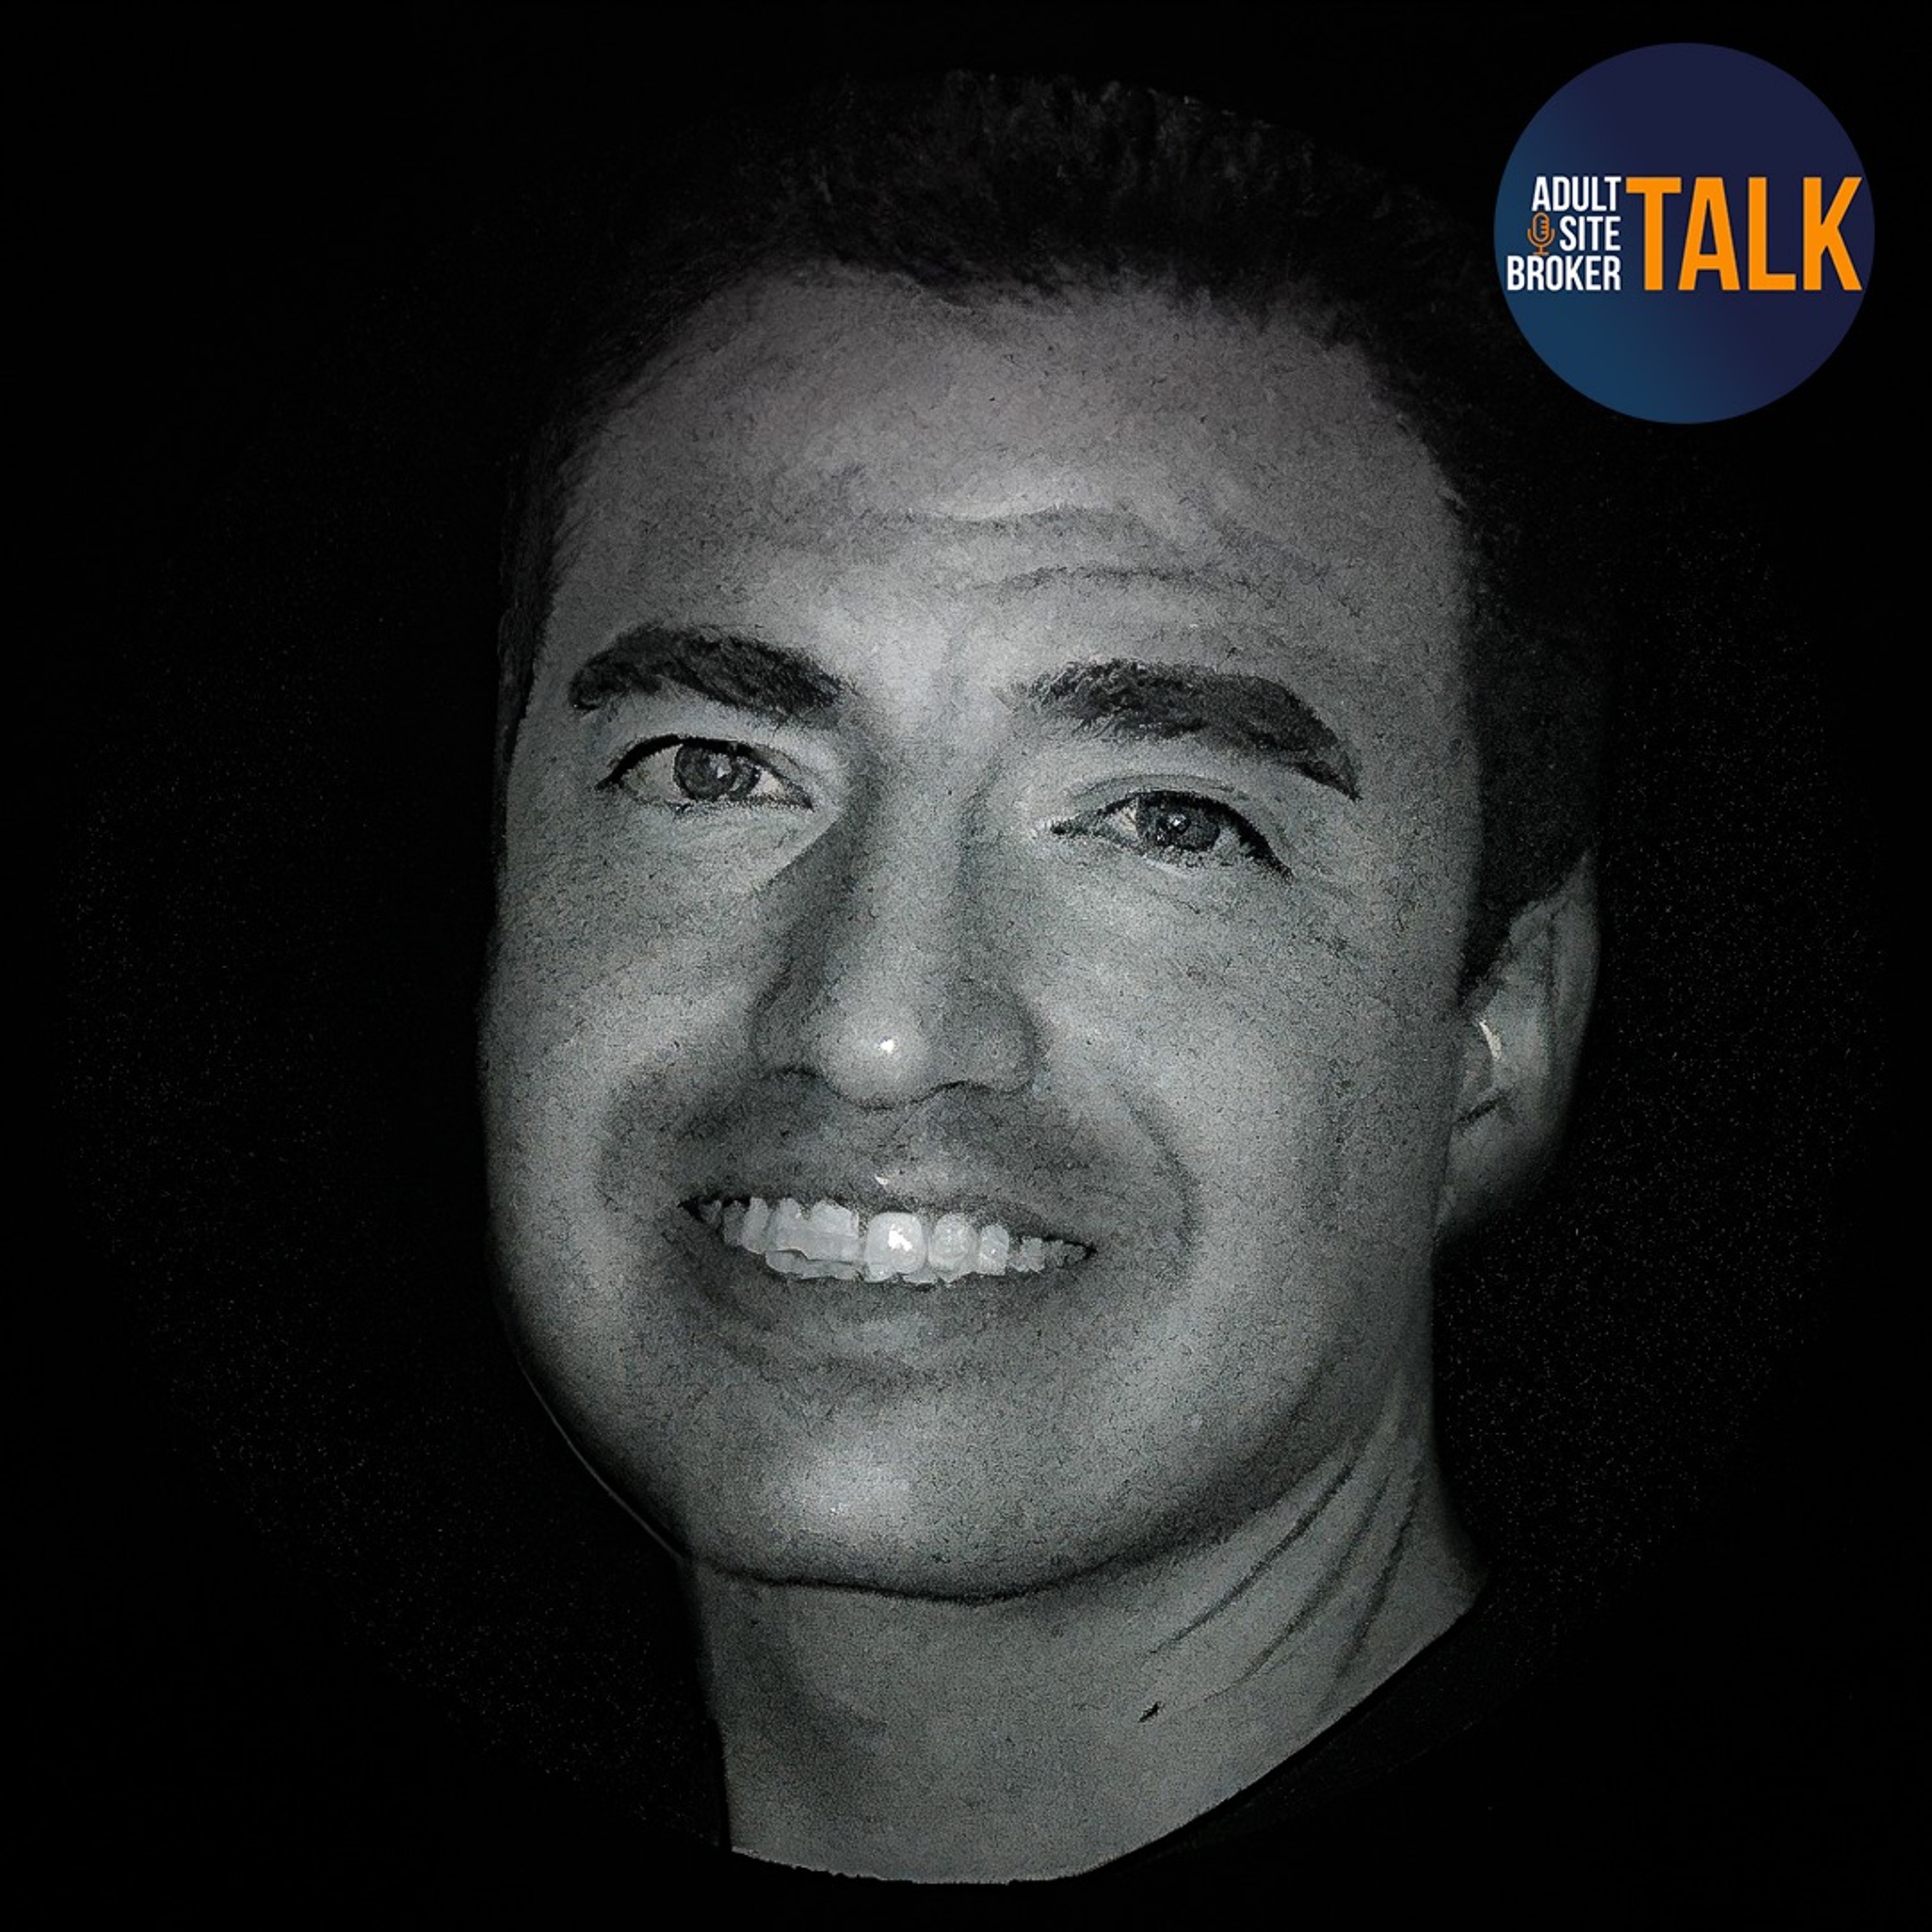 Adult Site Broker Talk Episode 182 With Michael Gonzales Of YumyHub